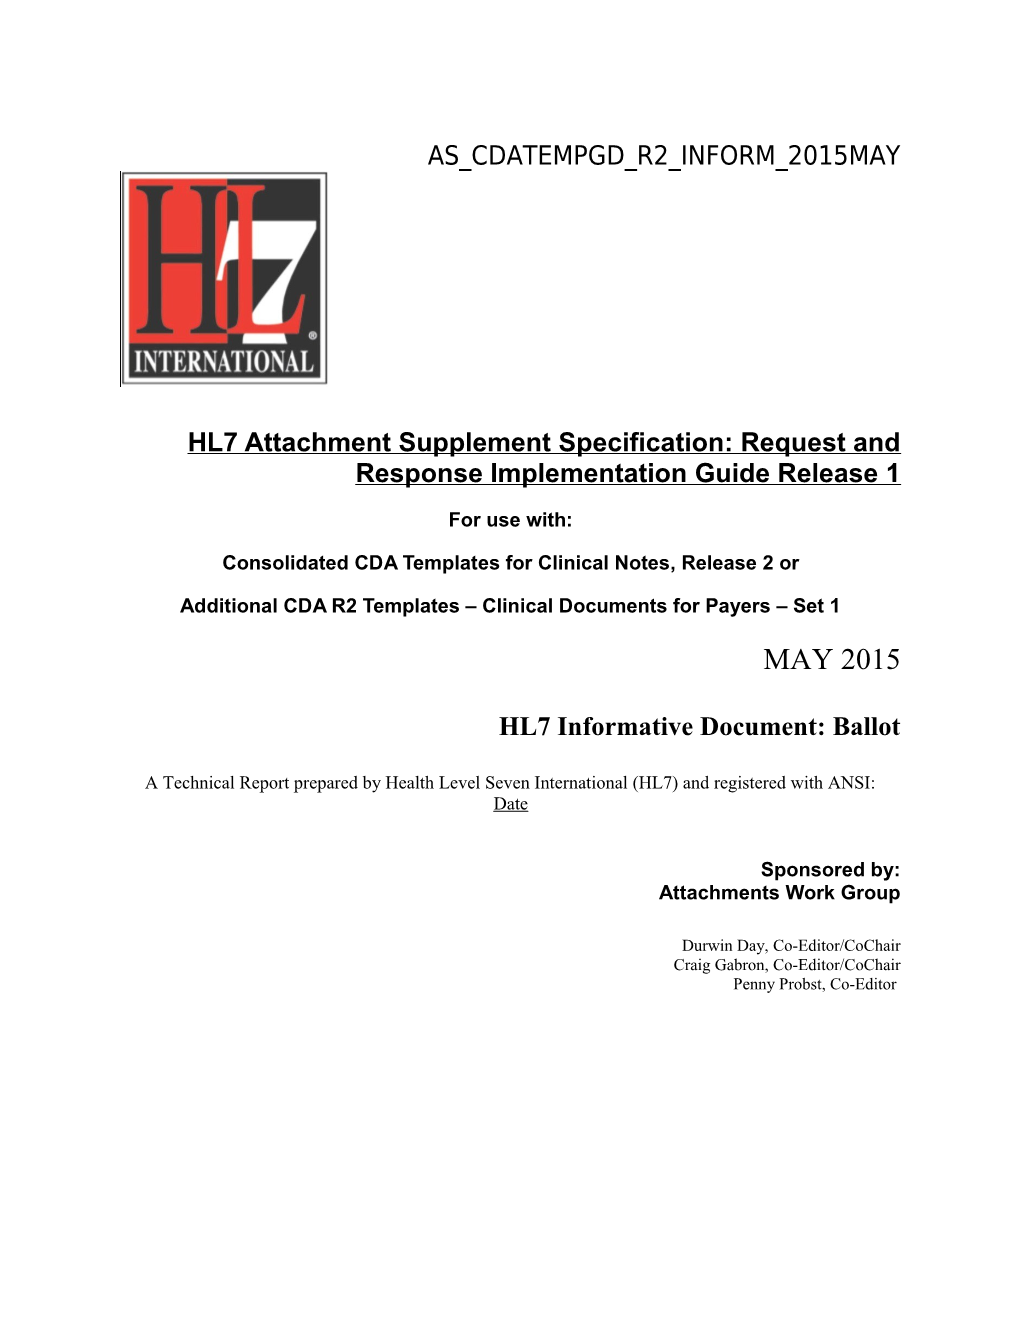 CDAR2 IG Supplement to IHE Consolidated Templated Guide s2